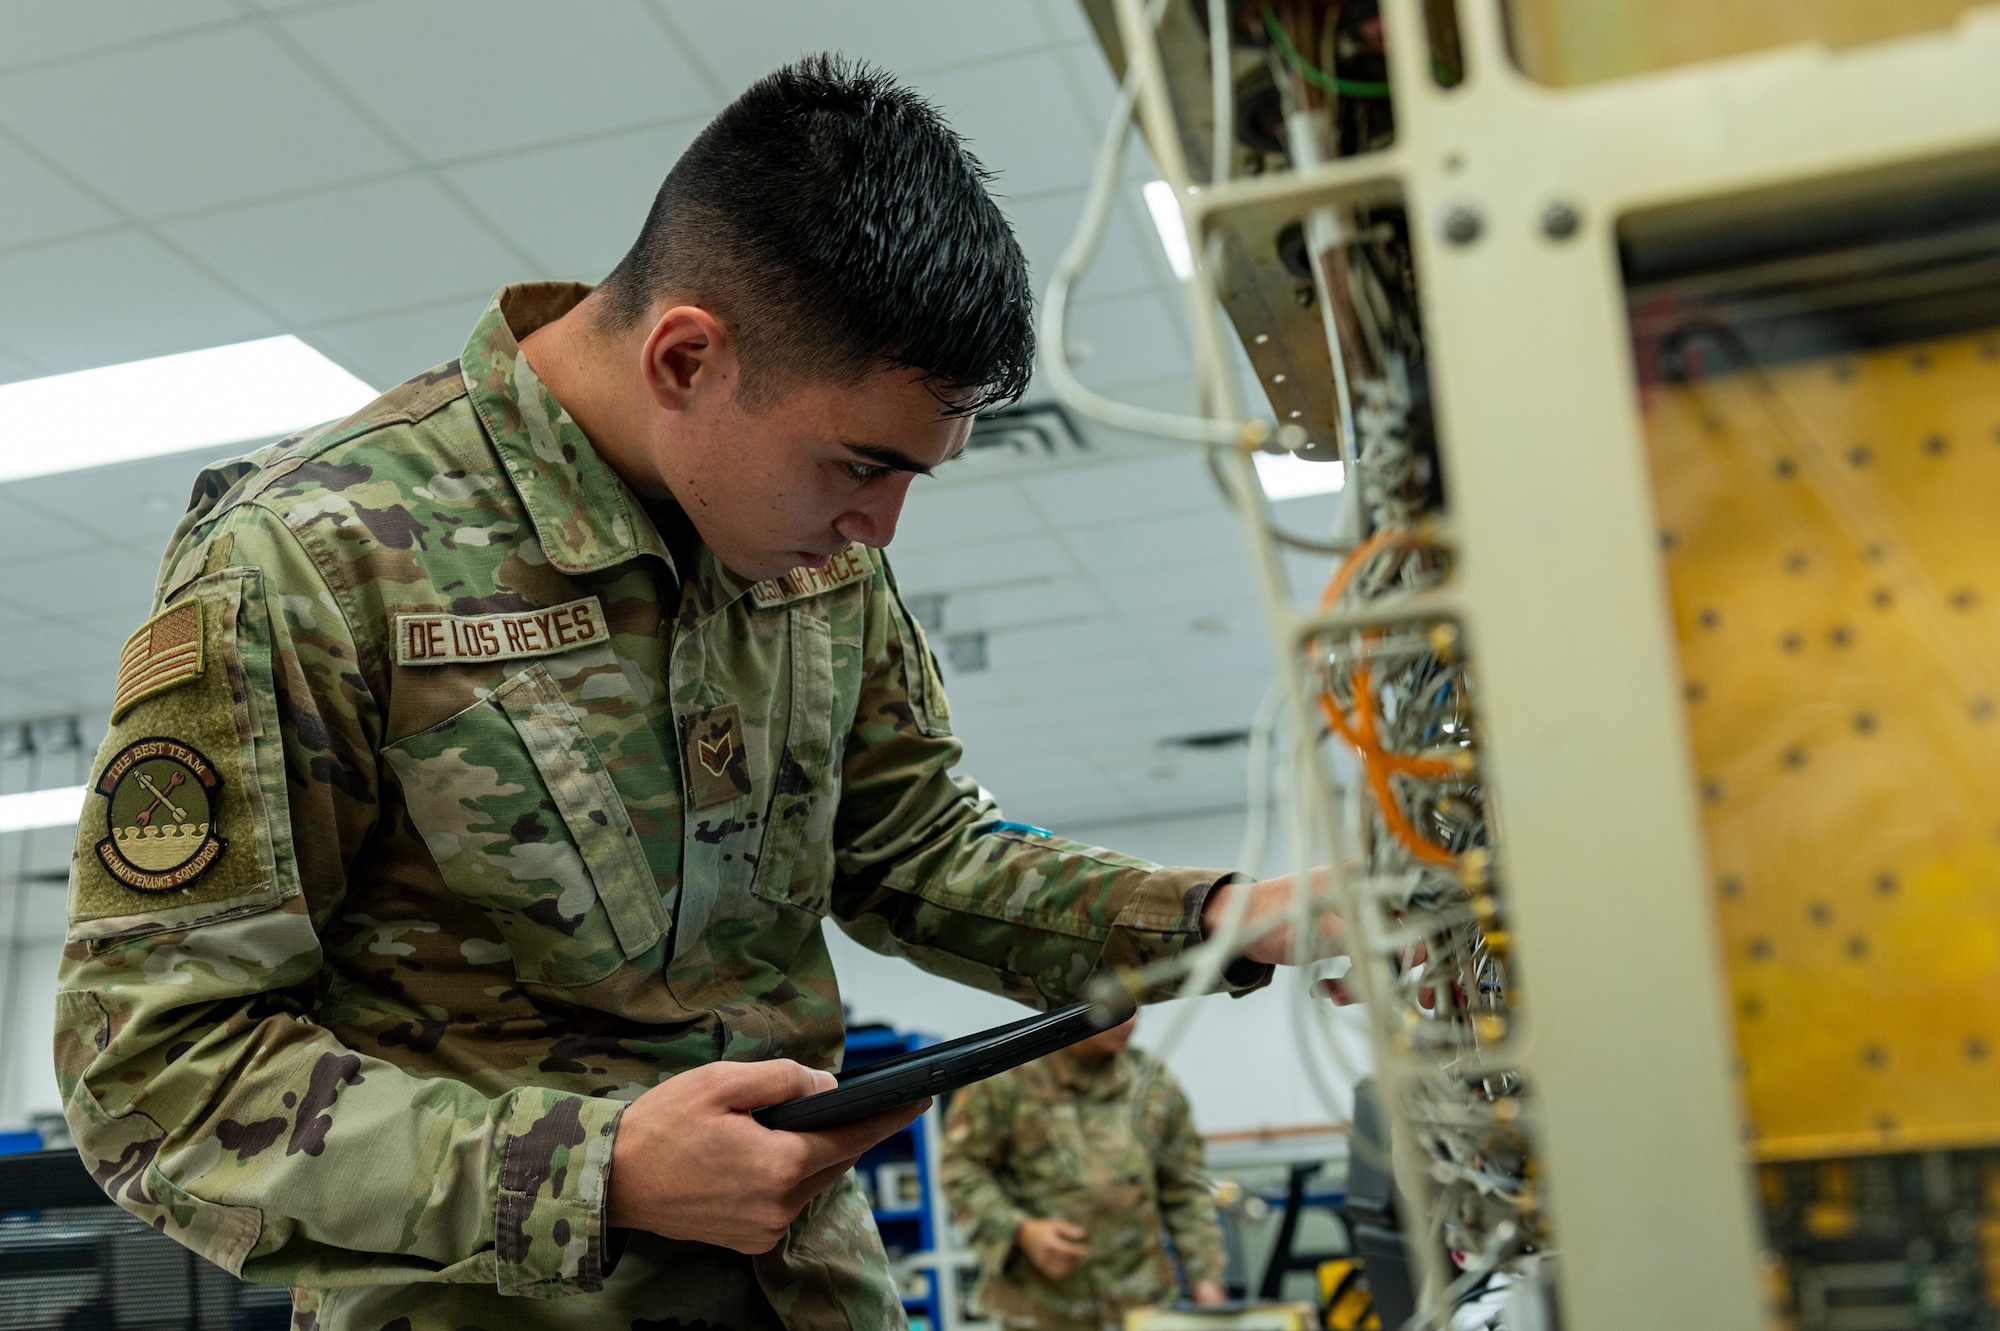 U.S. Air Force Senior Airman Bryant De Los Reyes, 51st Maintenance Squadron precision measurement equipment laboratory logistics technician, changes out a circuit in a joint service electronic combat systems tester at Osan Air Base, Republic of Korea, Dec. 15, 2023. The tester is used for radar threat warning systems on an F-16 Fighting Falcon. (U.S. Air Force photo by Senior Airman Kaitlin Castillo)